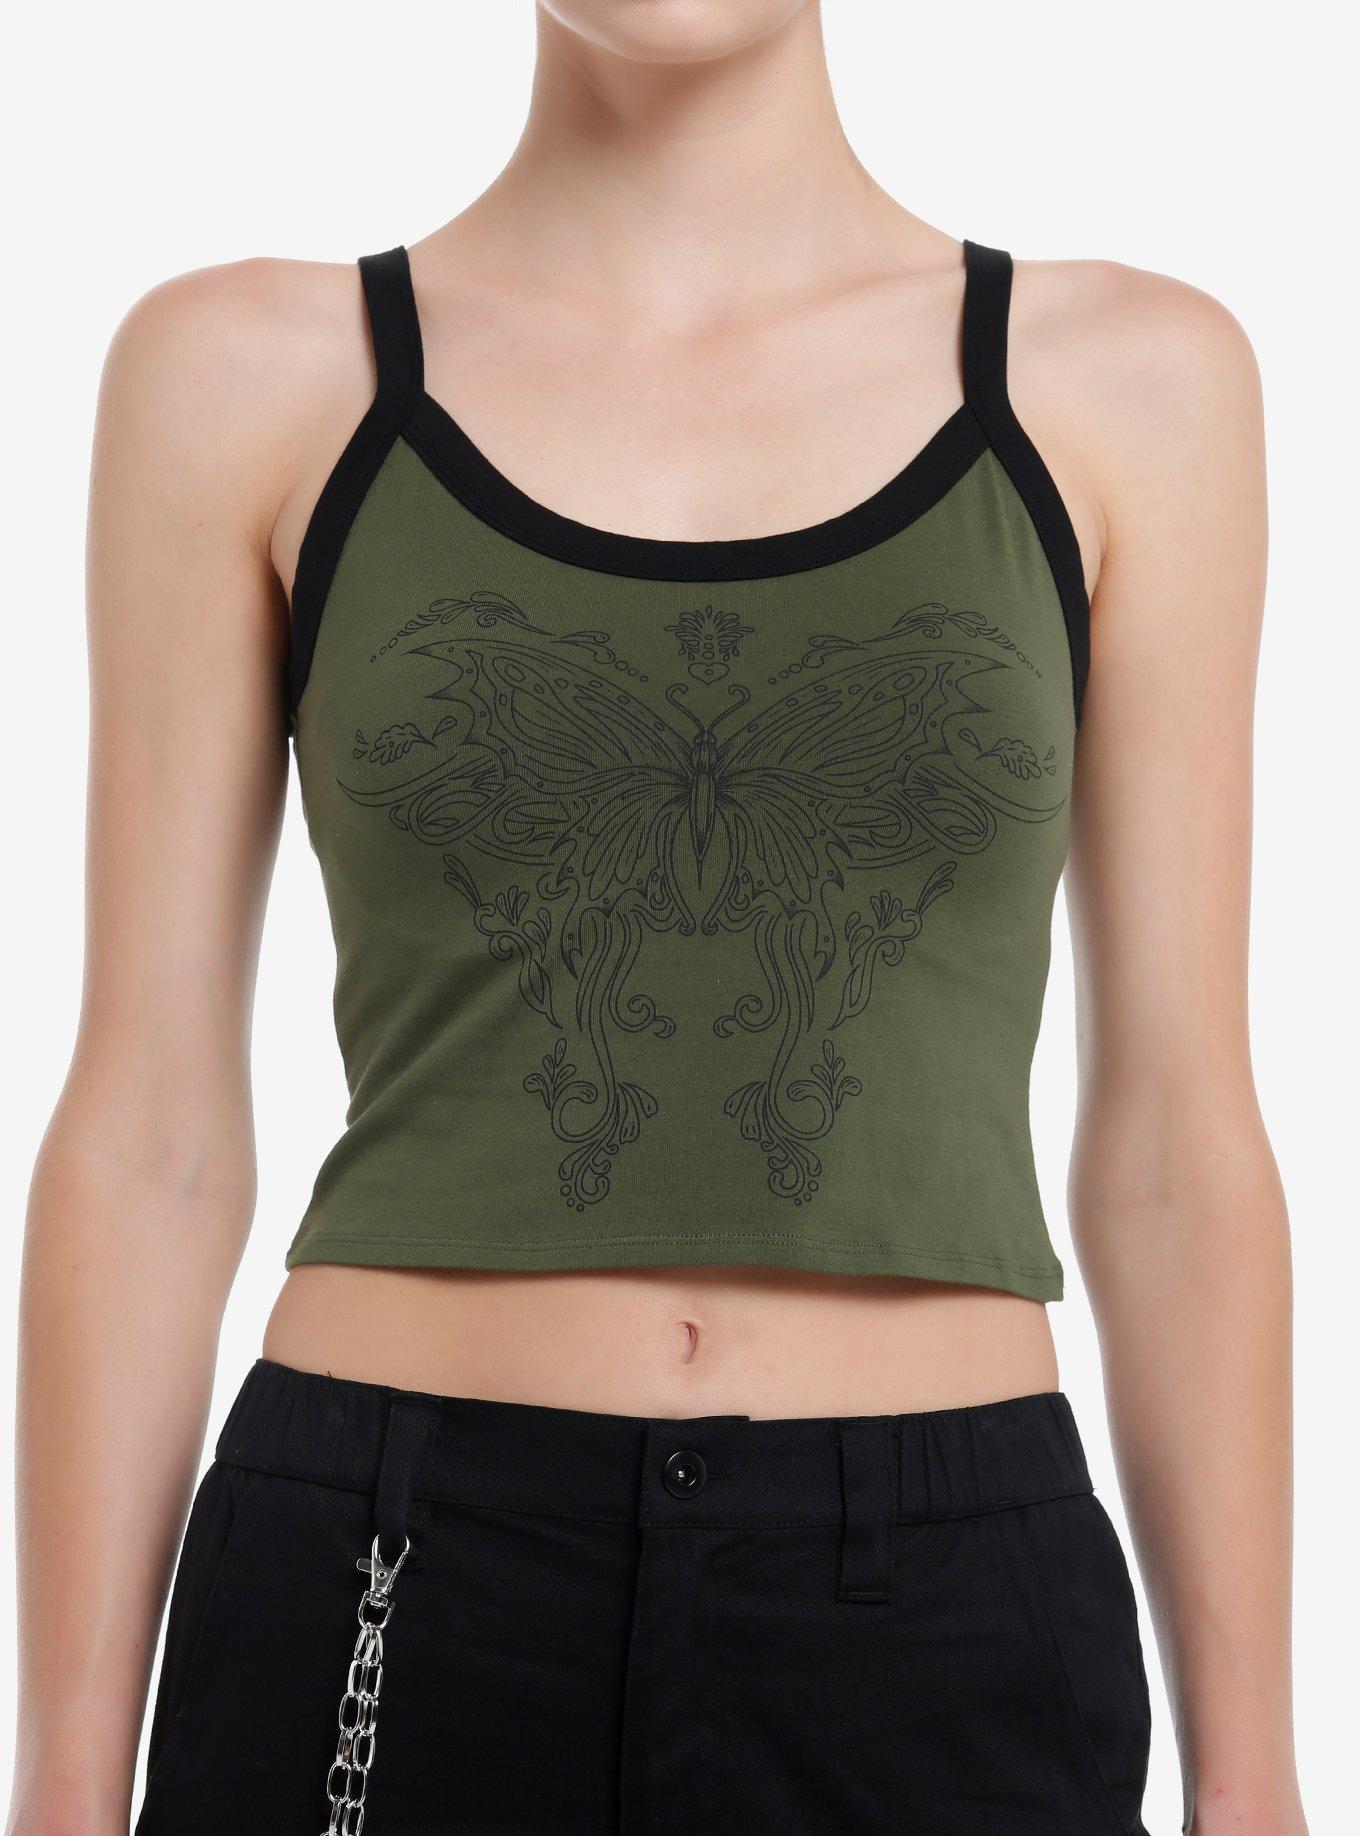 Social Collision Intricate Butterfly Girls Crop Cami, BLACK, hi-res